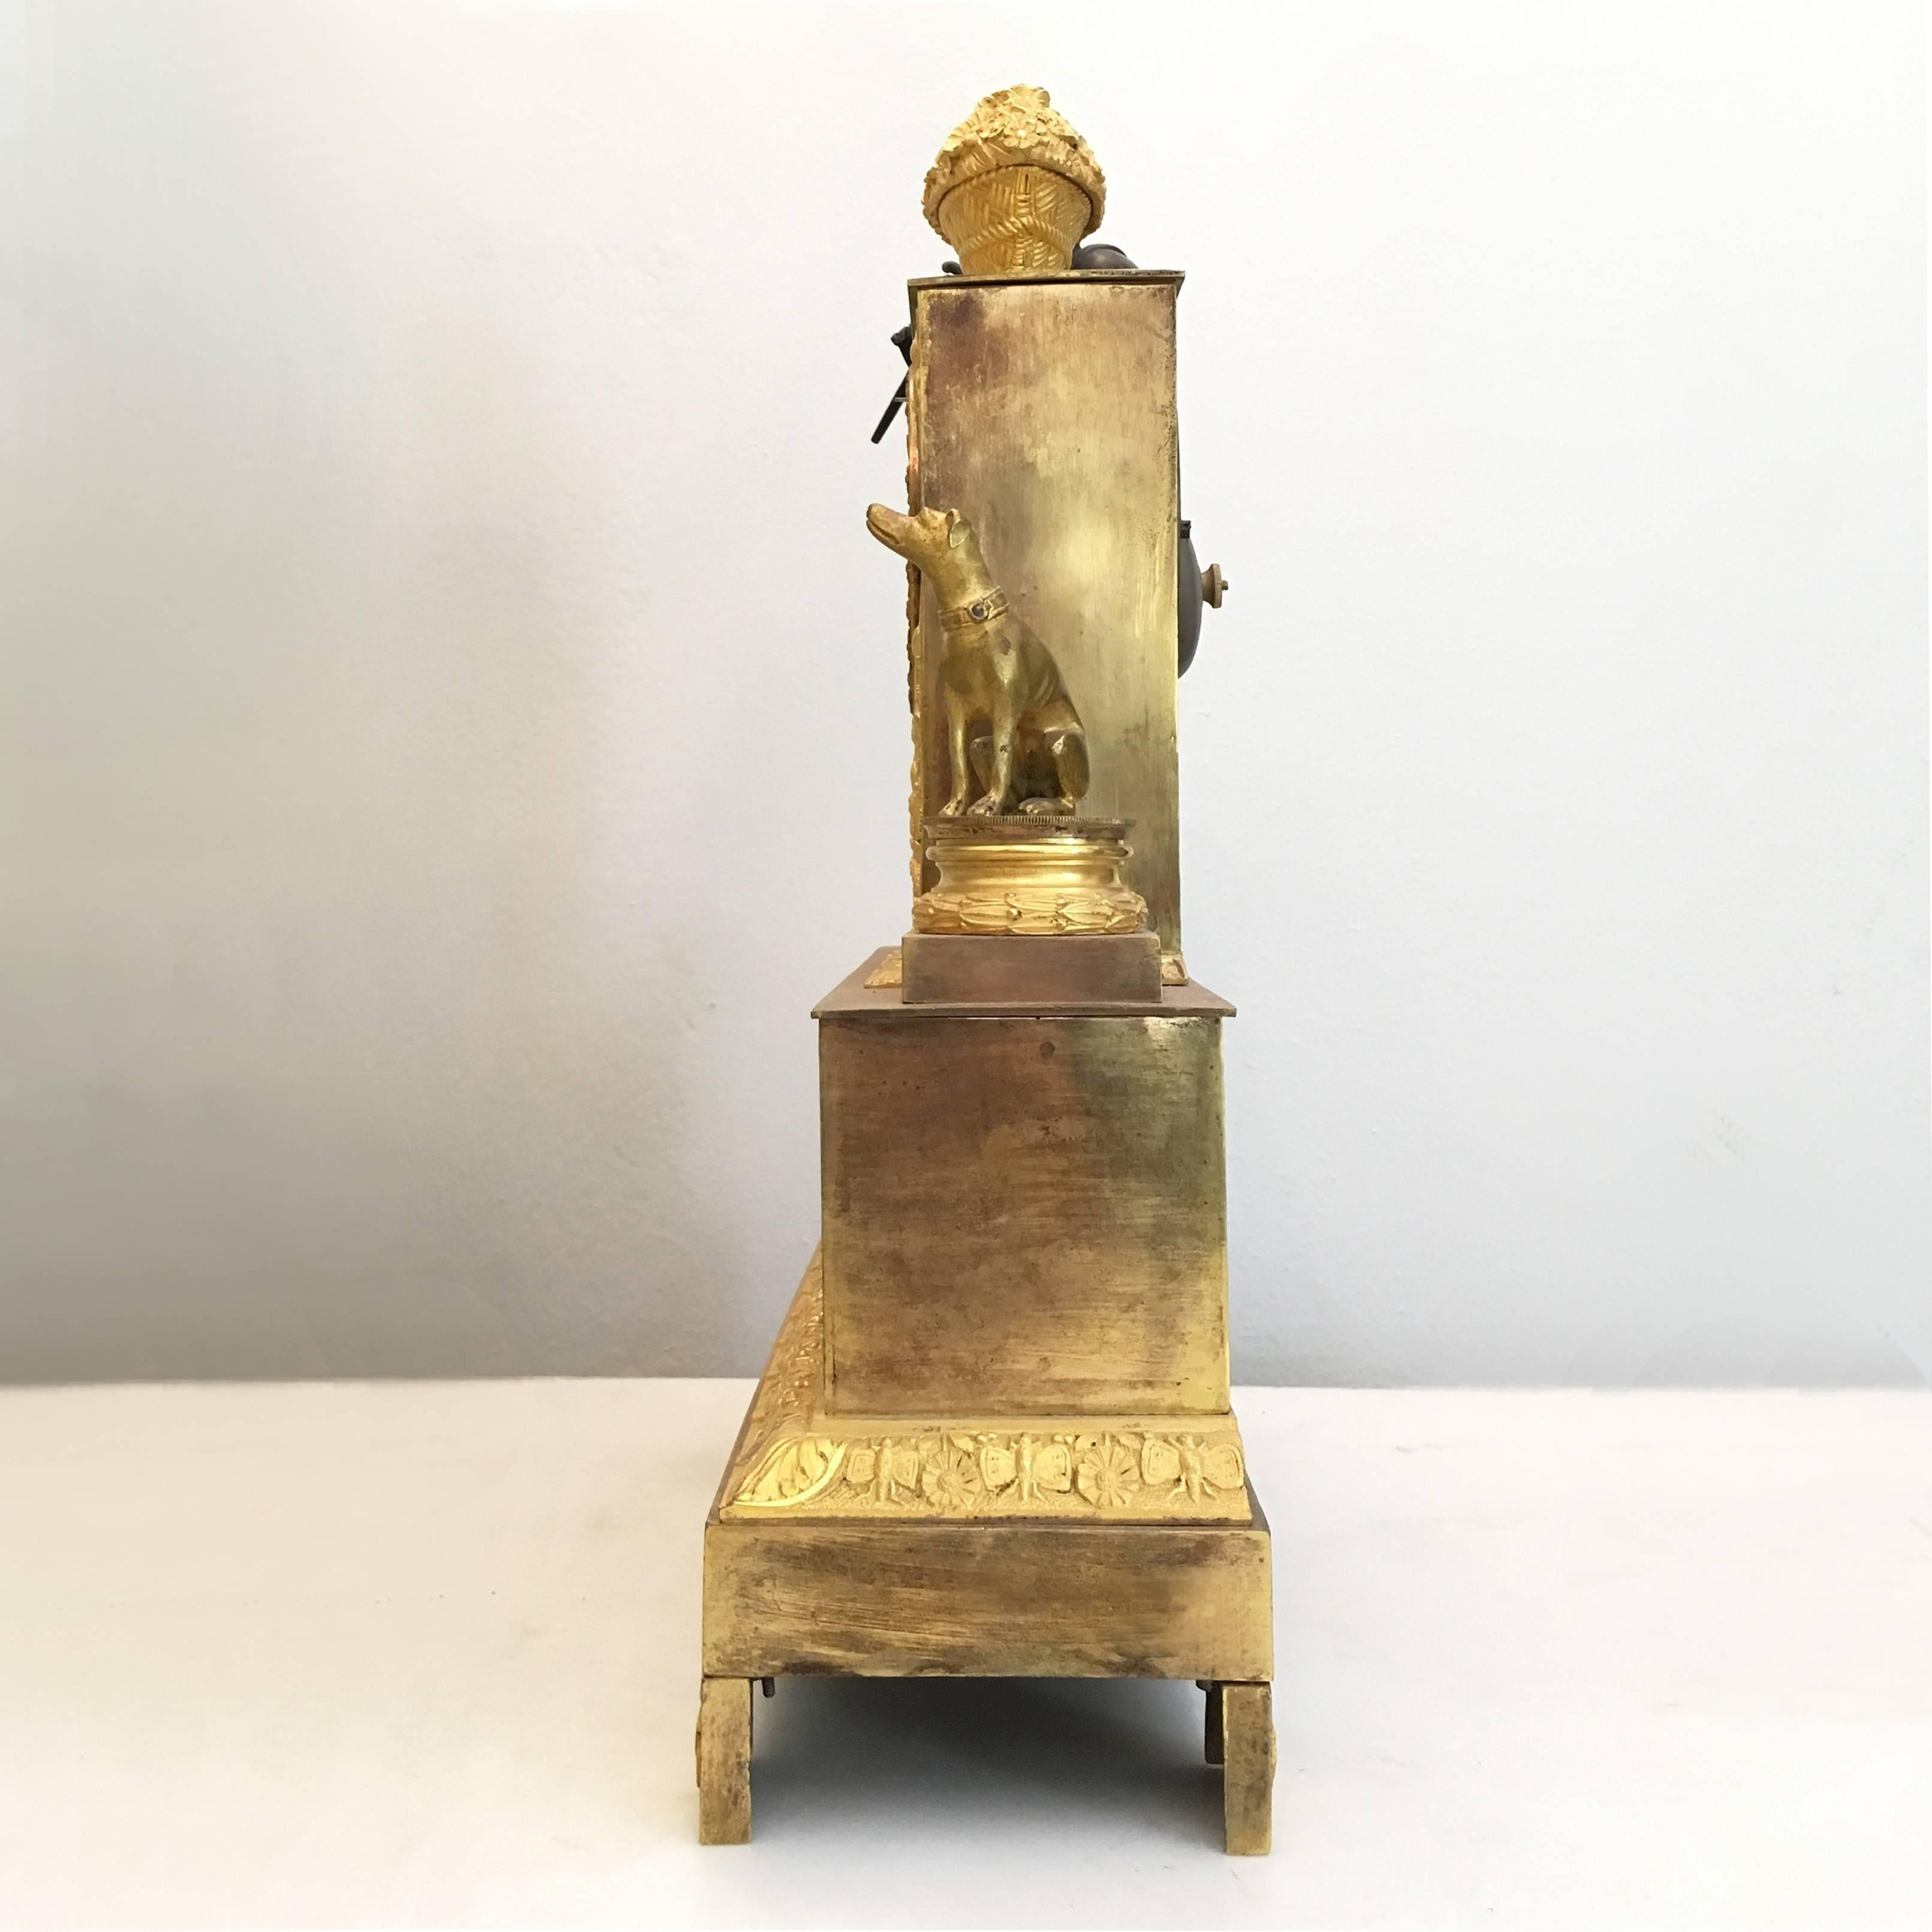 Neoclassical Early 19th Century French Gilt Bronze Pendulum Clock with Dionysus